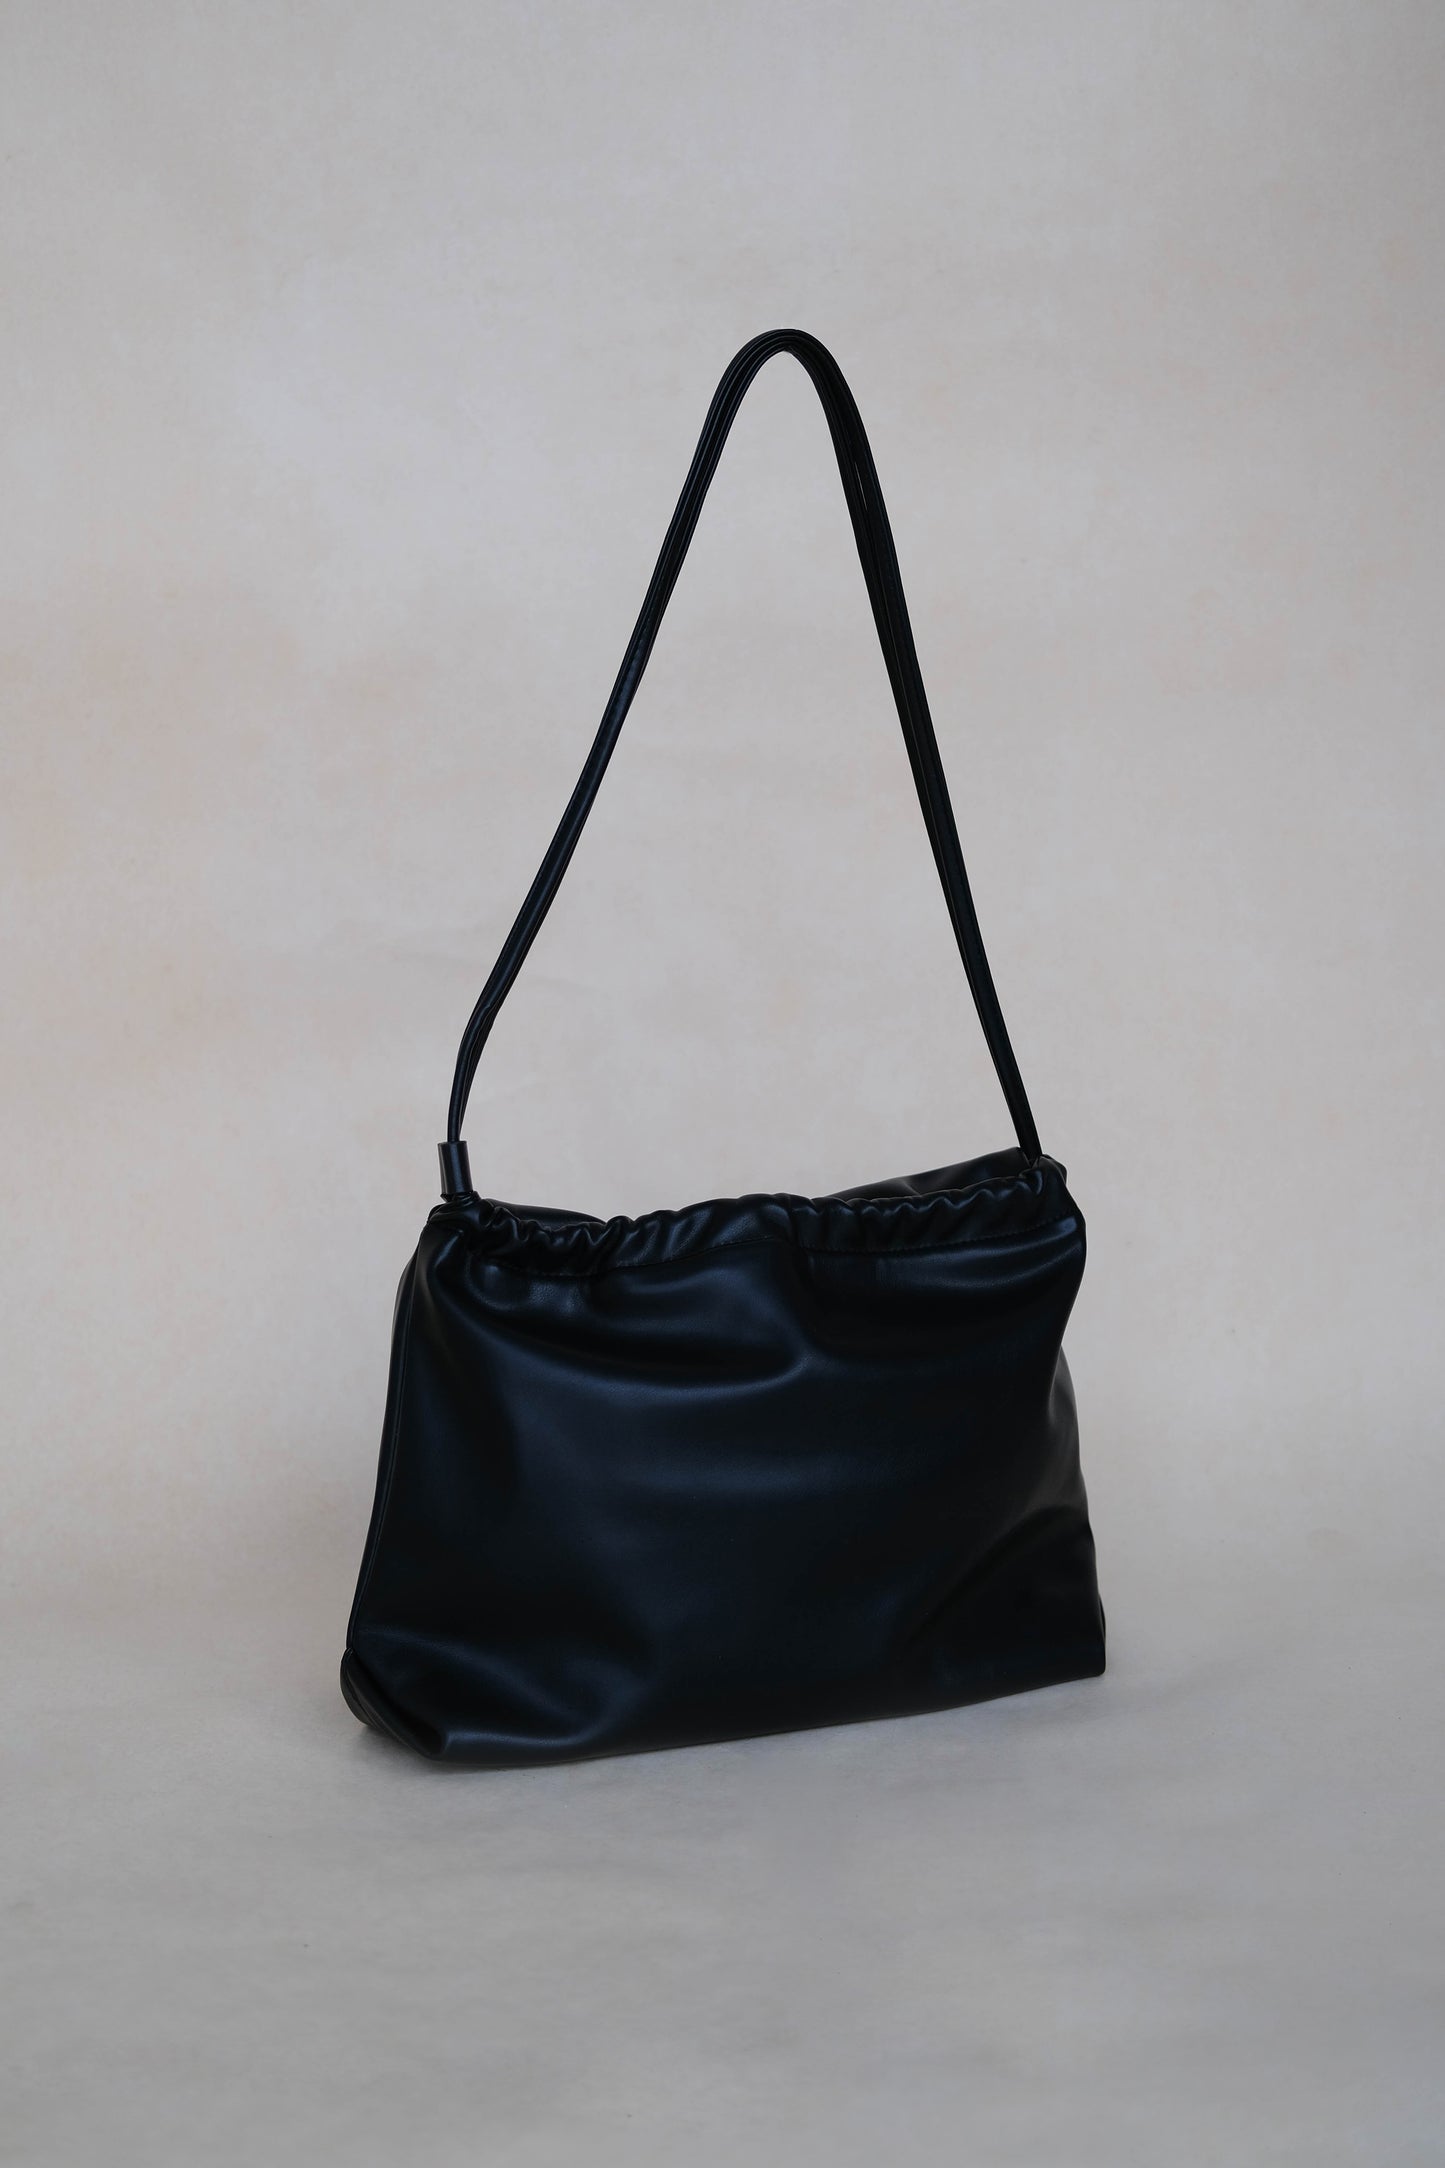 Drawstring pleated large capacity shoulder bag in classic black